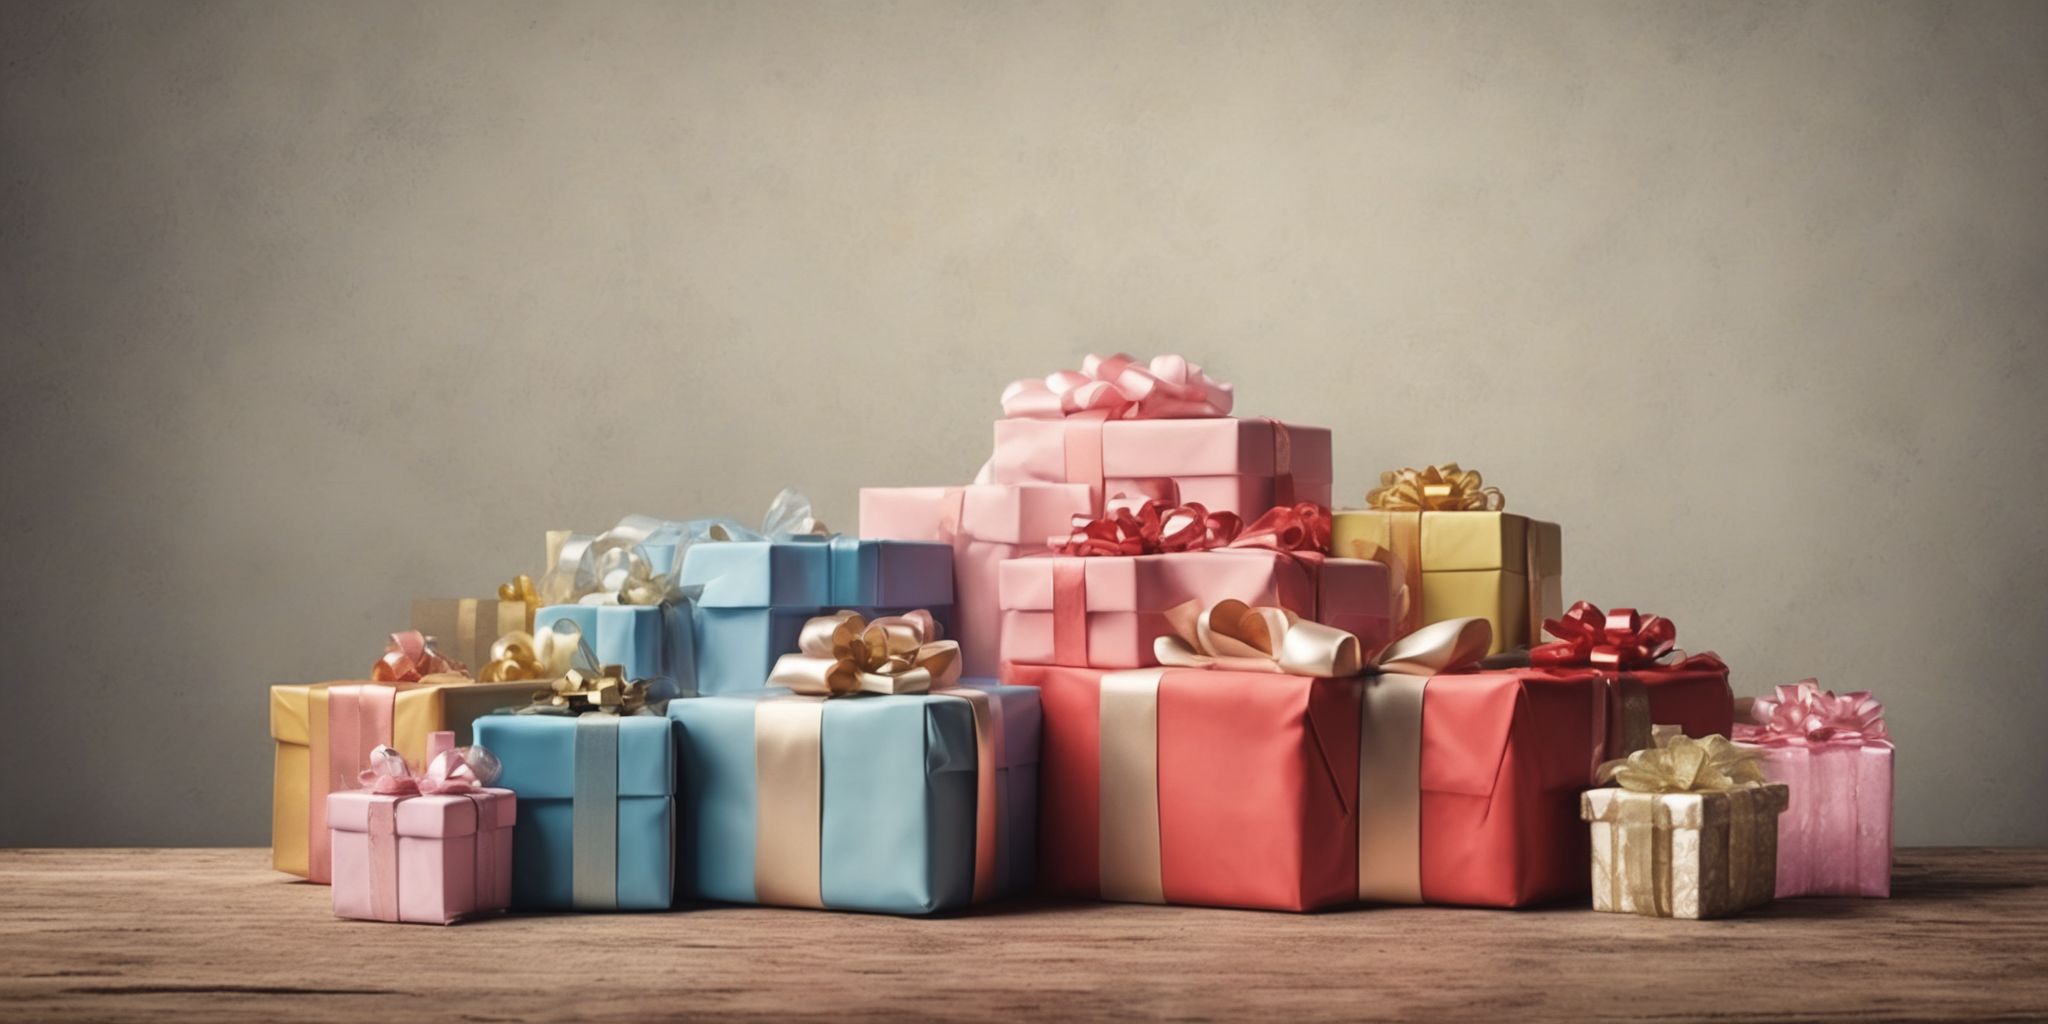 Plan Gifts: Presents  in realistic, photographic style